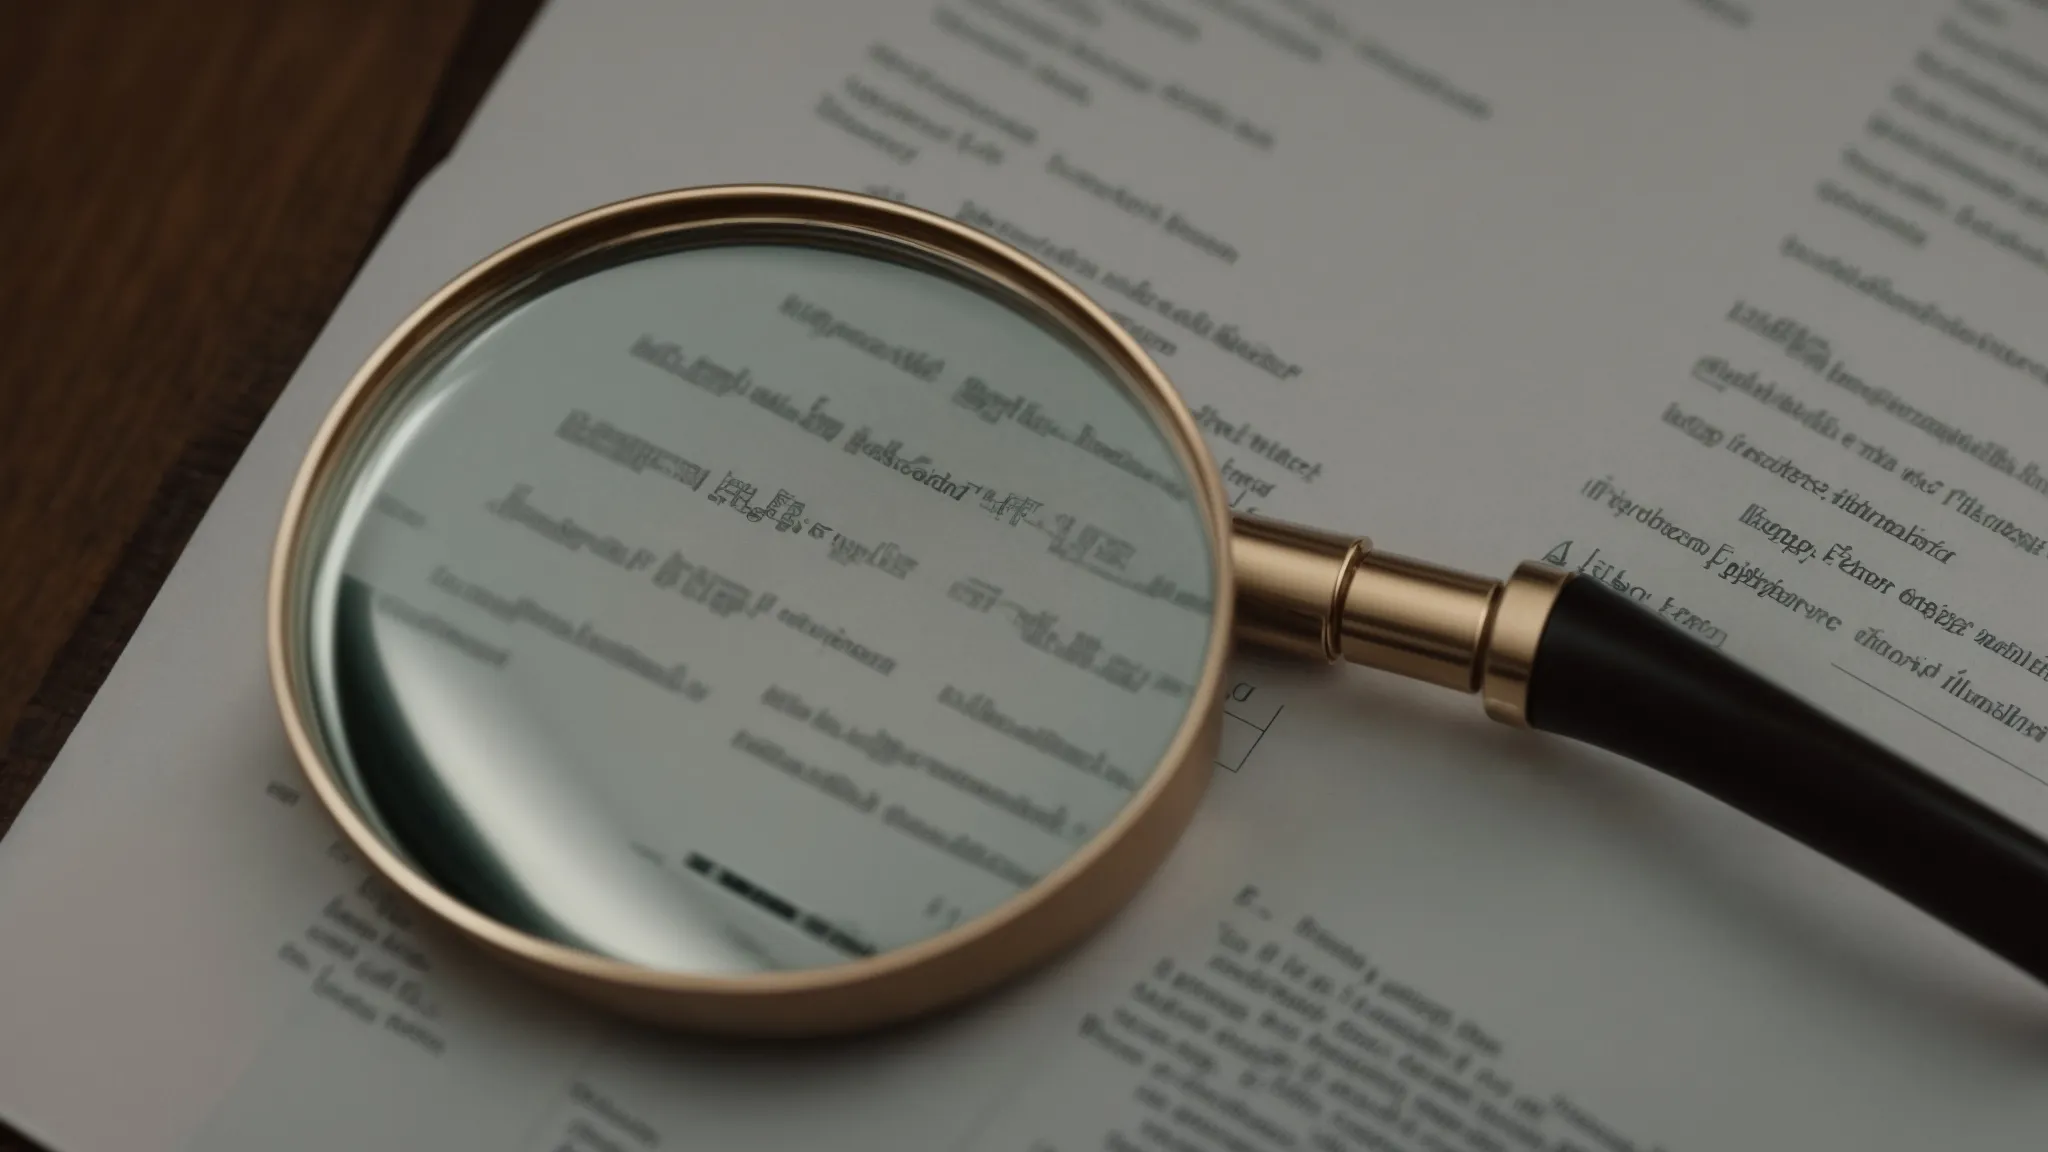 a photo of a laptop on a desk displaying a magnifying glass and a jumbled mix of keywords.